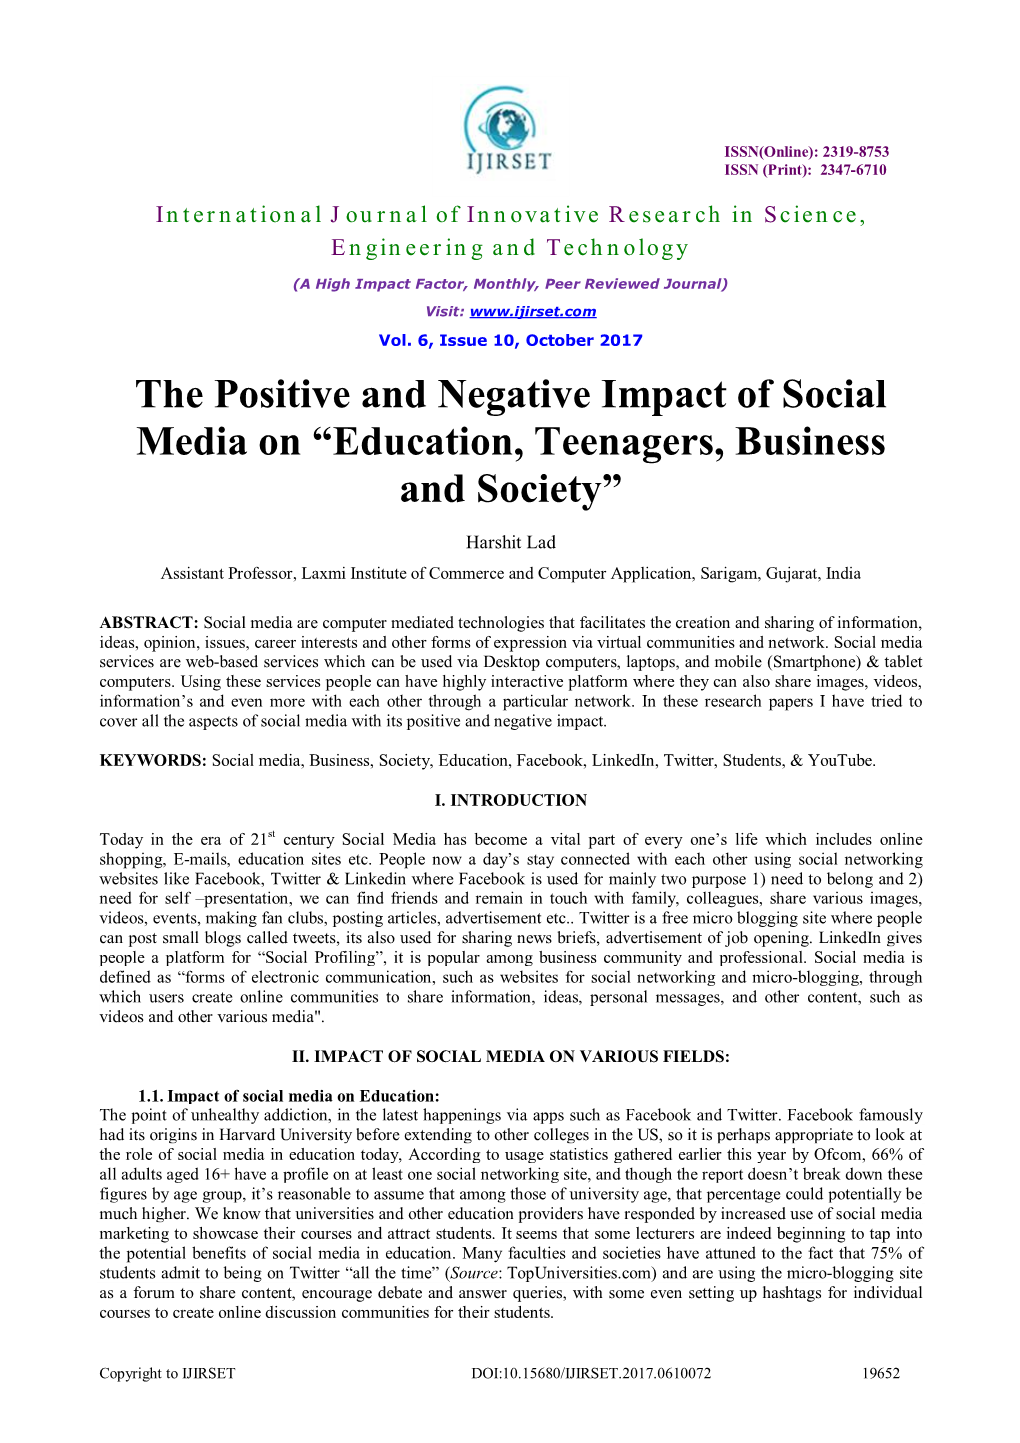 The Positive and Negative Impact of Social Media on “Education, Teenagers, Business and Society”